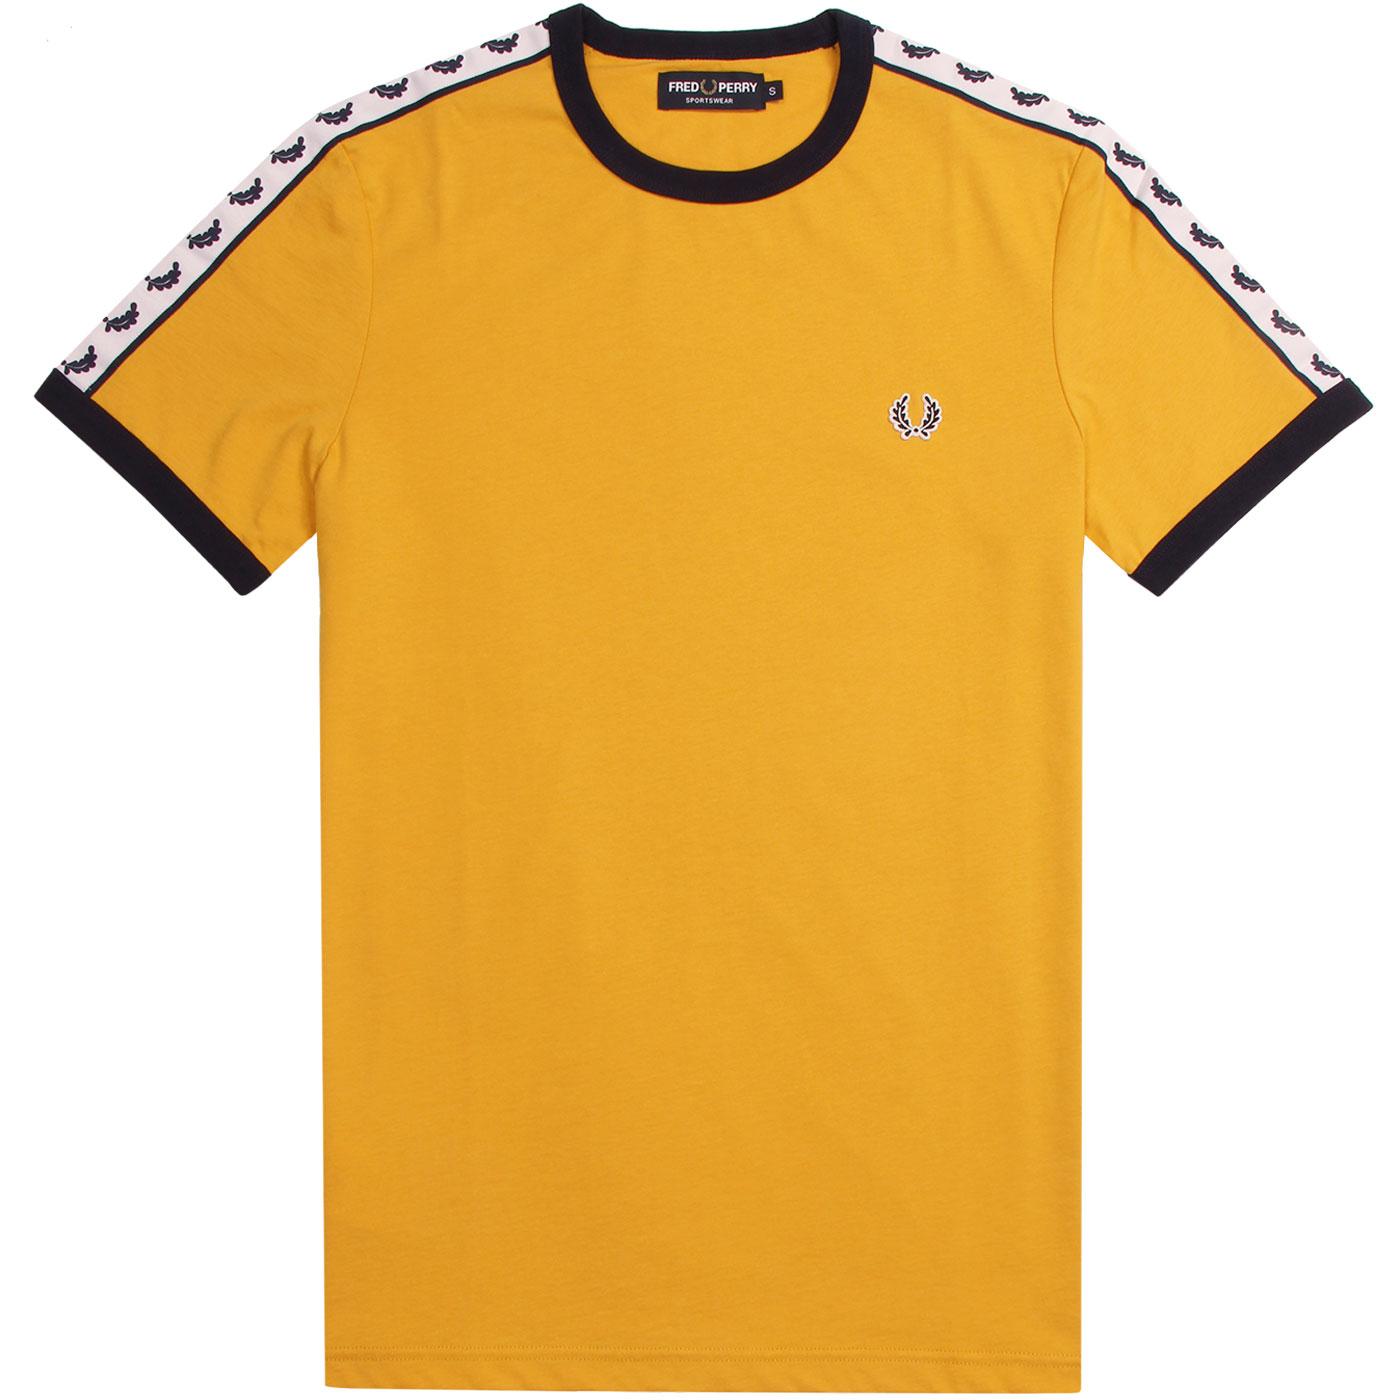 FRED PERRY Men's Retro Taped Sleeve Ringer Tee in Gold